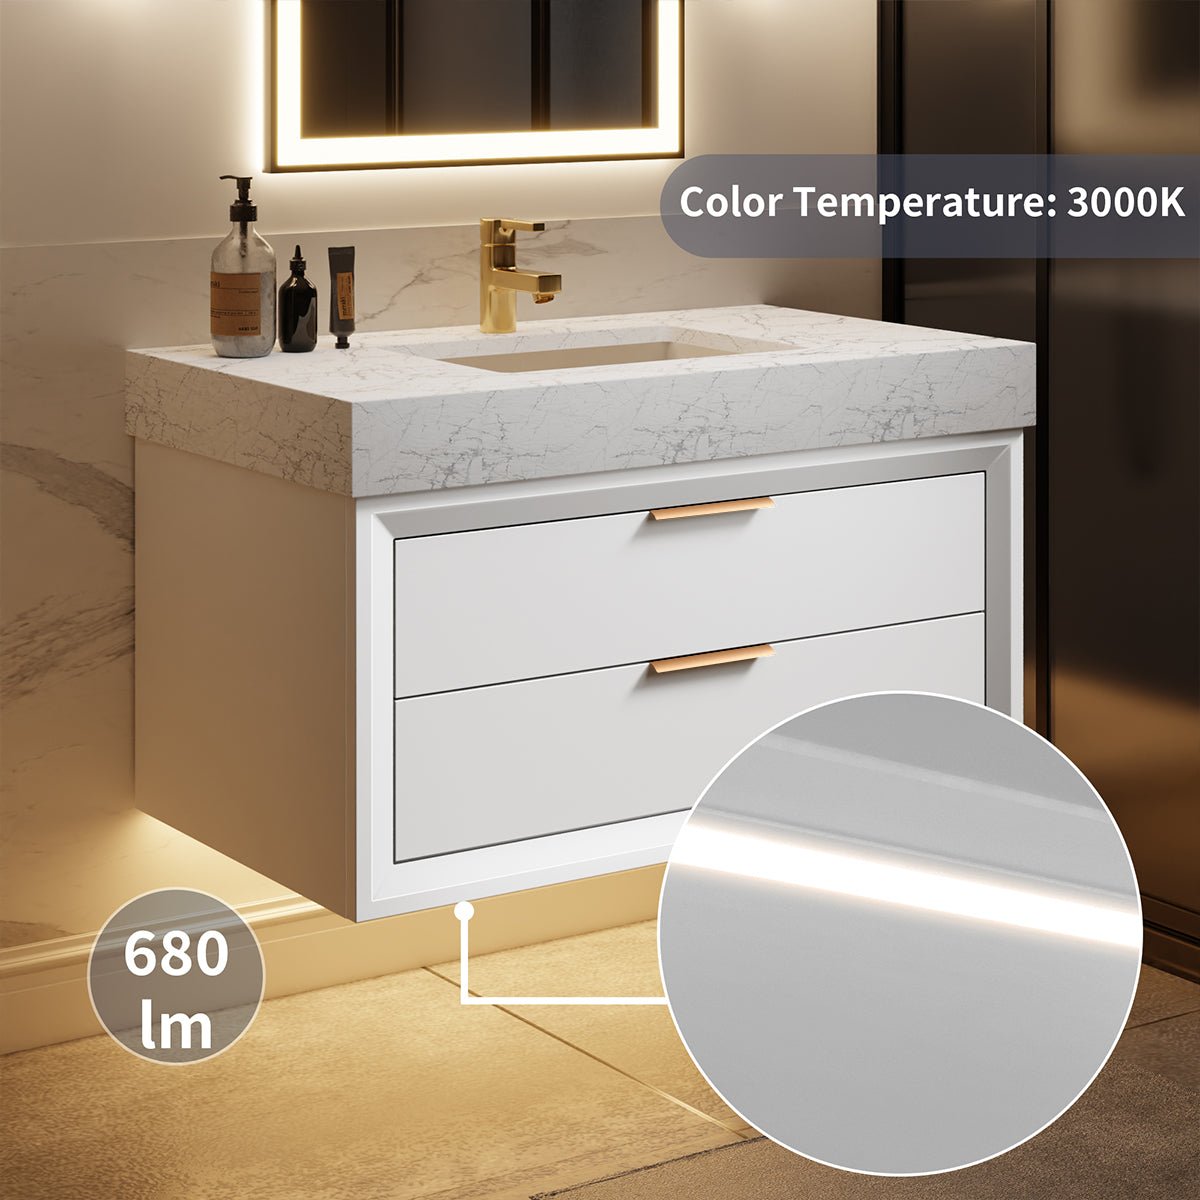 Glam 36" Modern Floating White Rubberwood Bathroom Vanity Cabinet with Lights and Stone Slab Countertop, Single Sinks